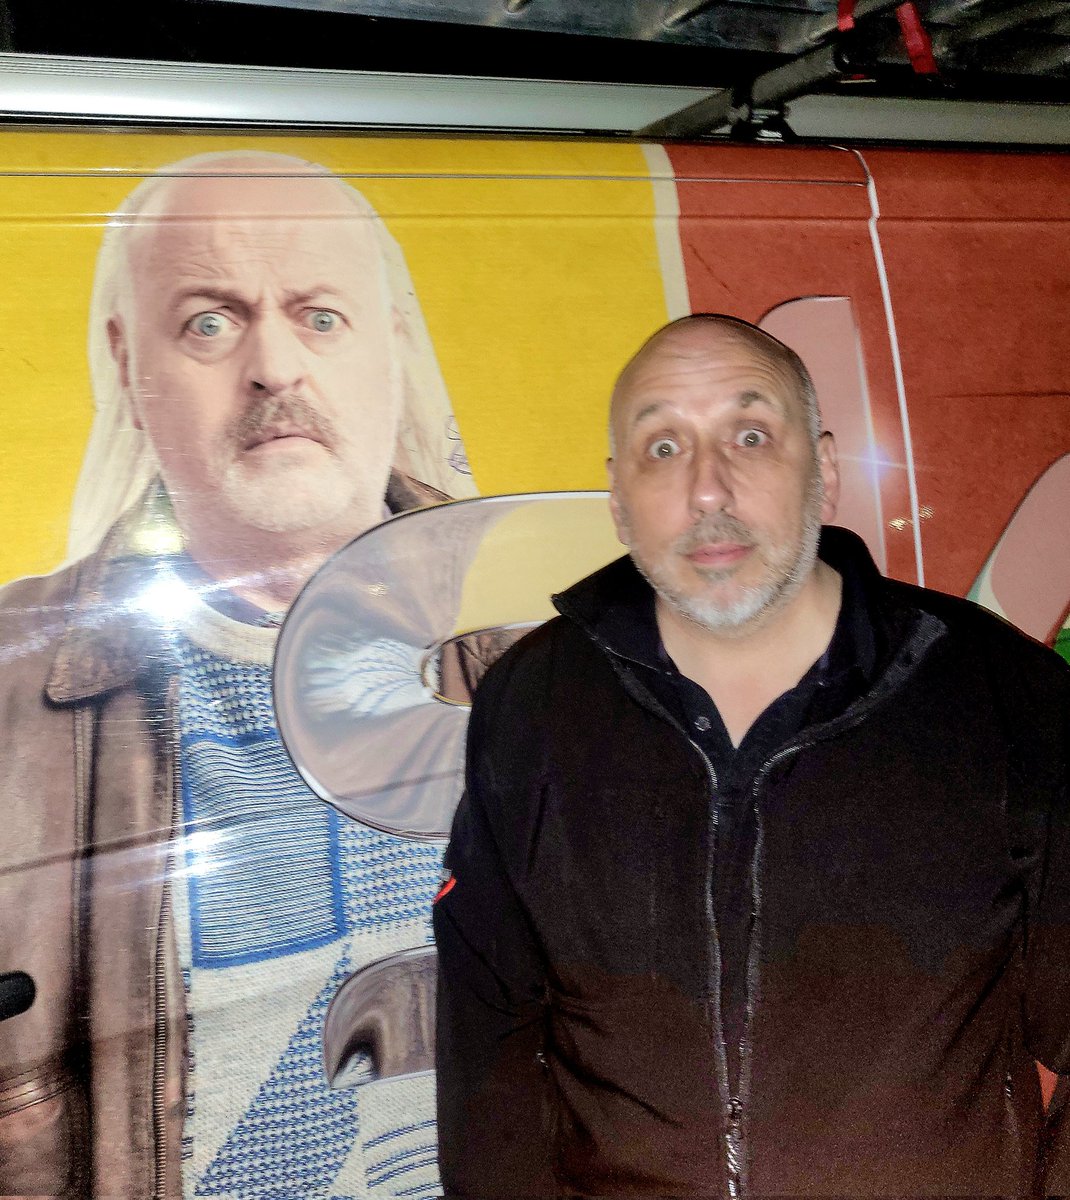 @BillBailey you have a doppelganger.